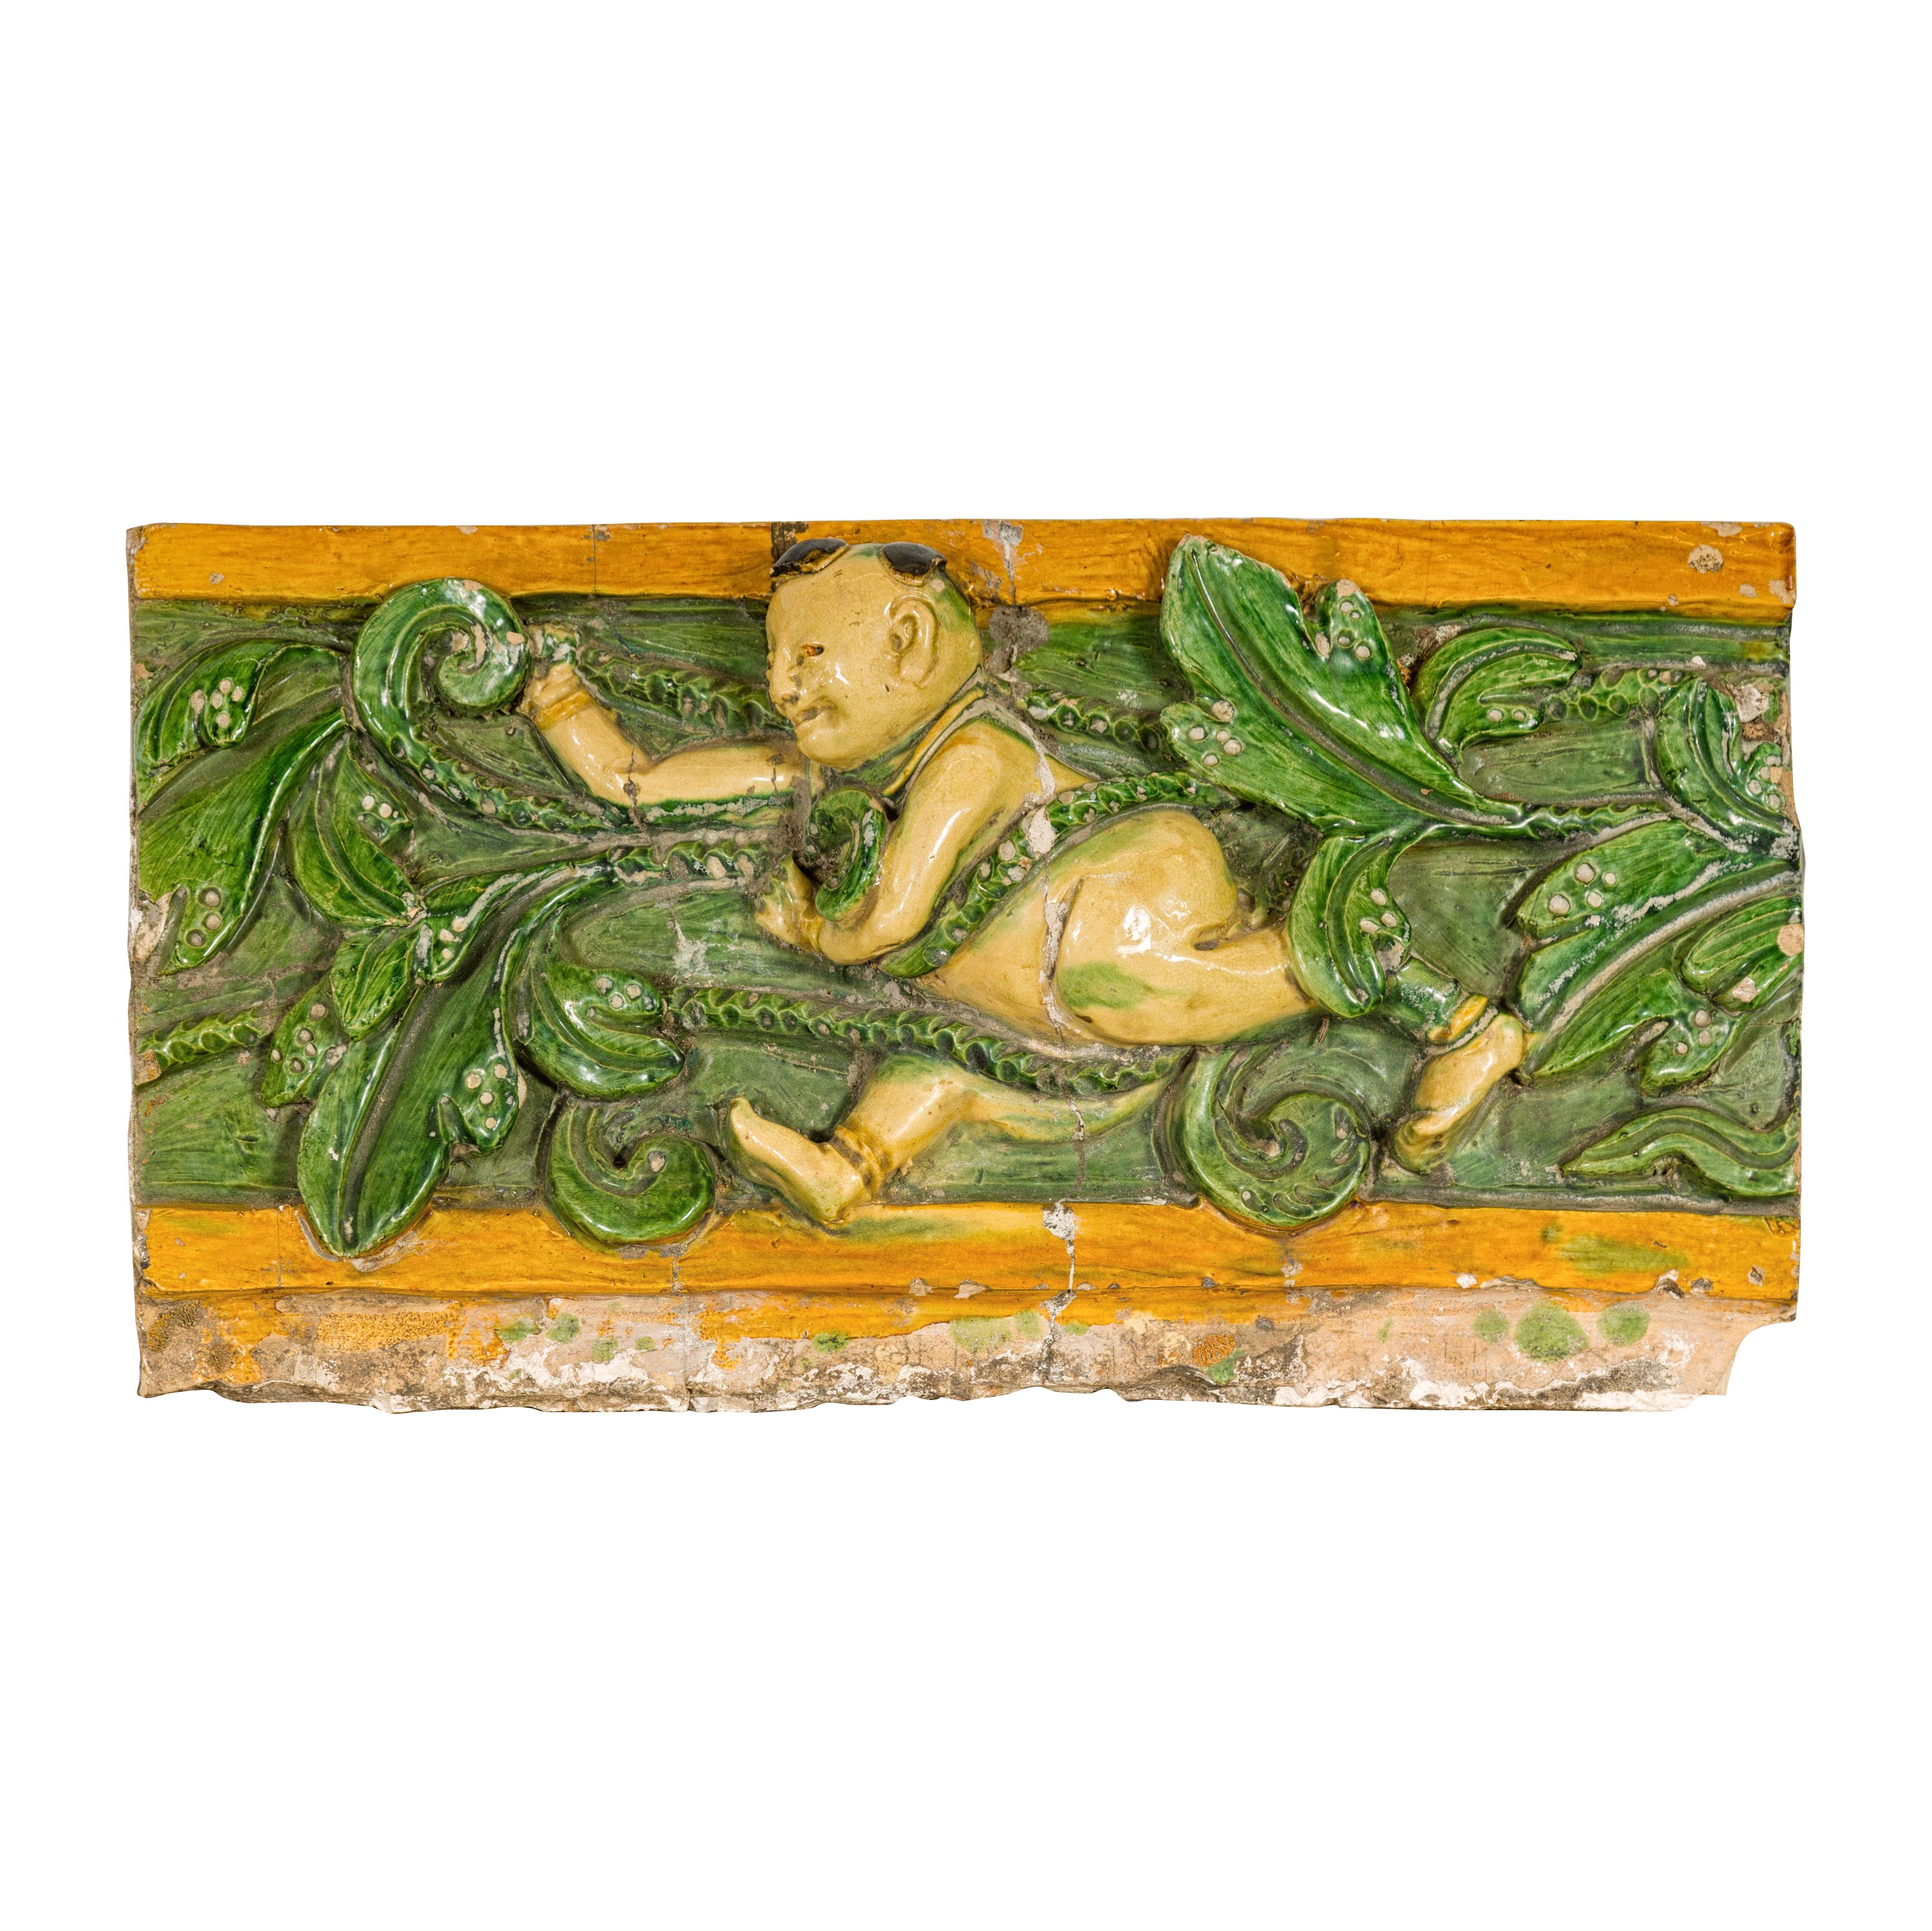 Qing Dynasty Tricolor Roof Fragment from a Temple Depicting a Boy Amidst Leaves For Sale 5